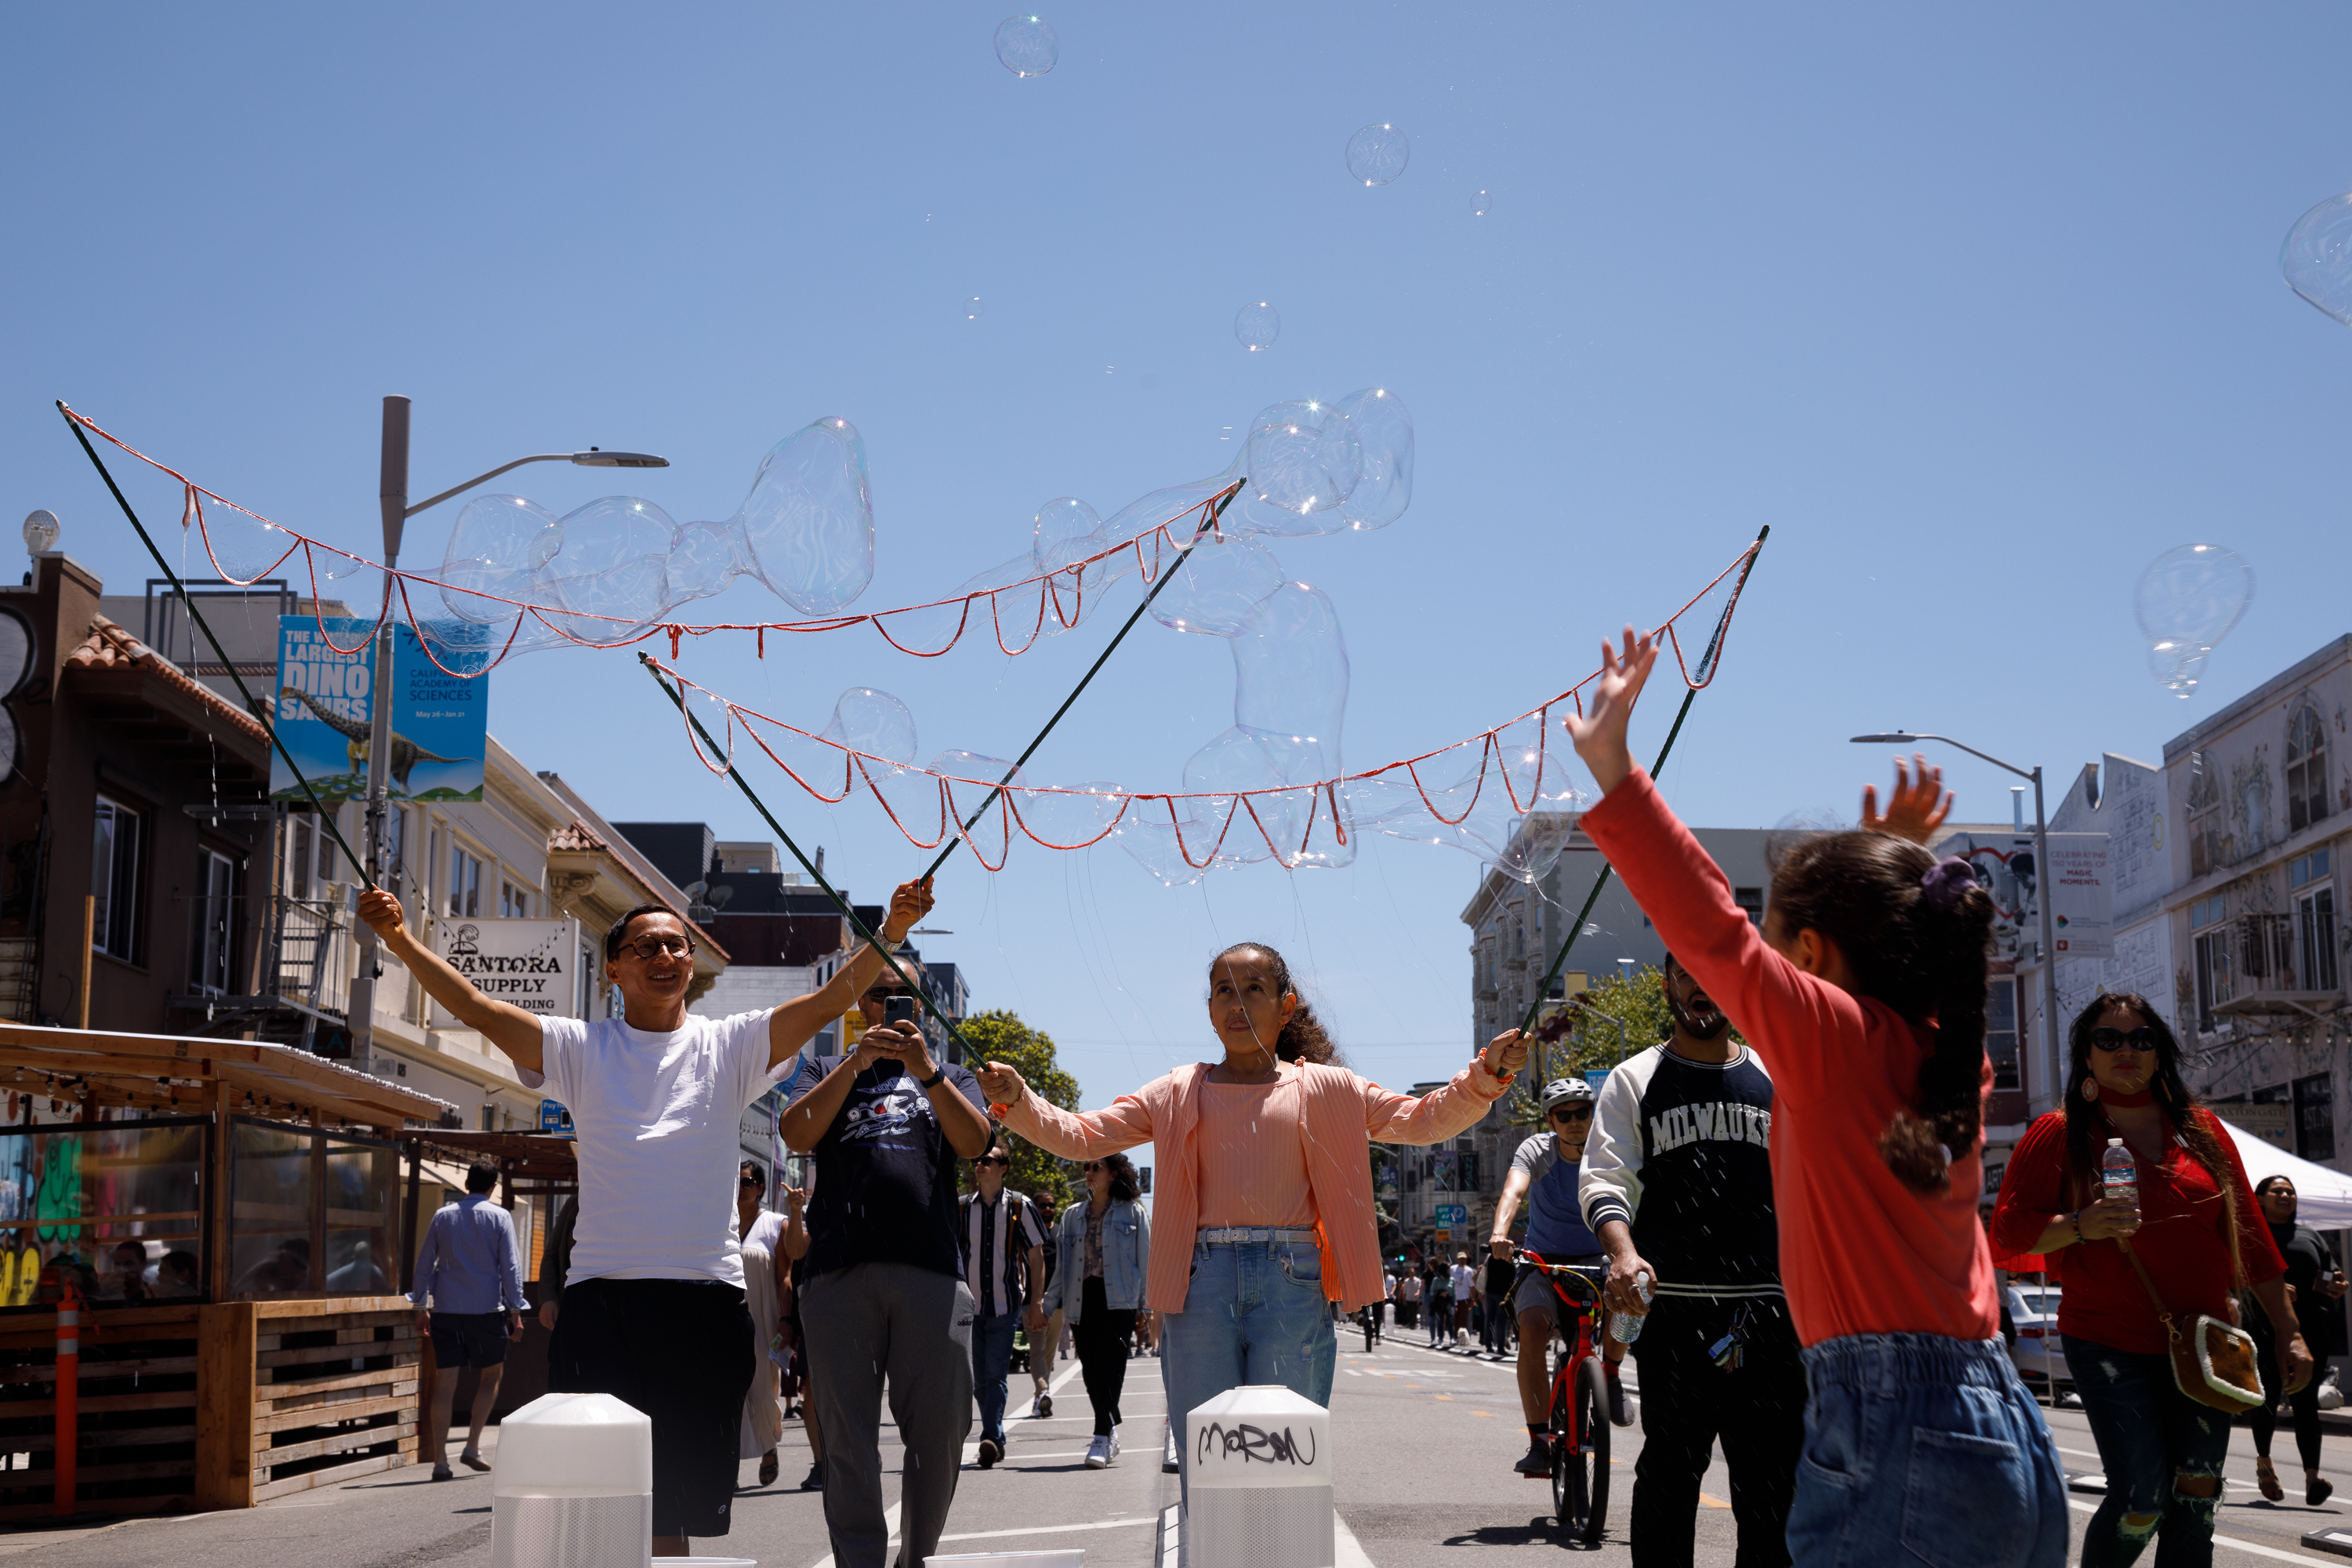 People on a sunny street are creating large bubbles with a string device.